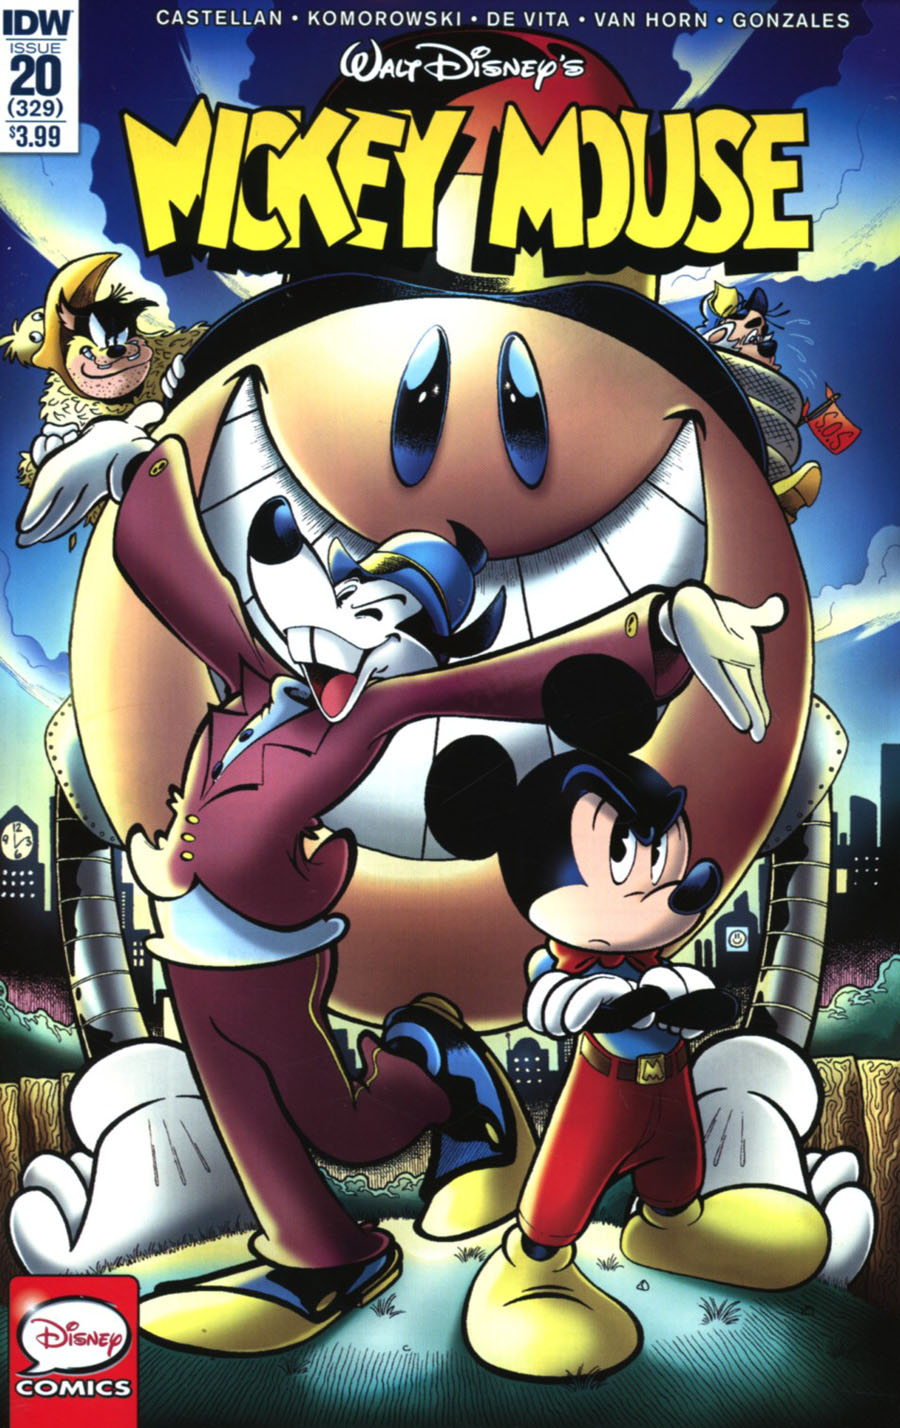 Mickey Mouse Vol 2 #20 Cover A Regular Jonathan Gray Cover